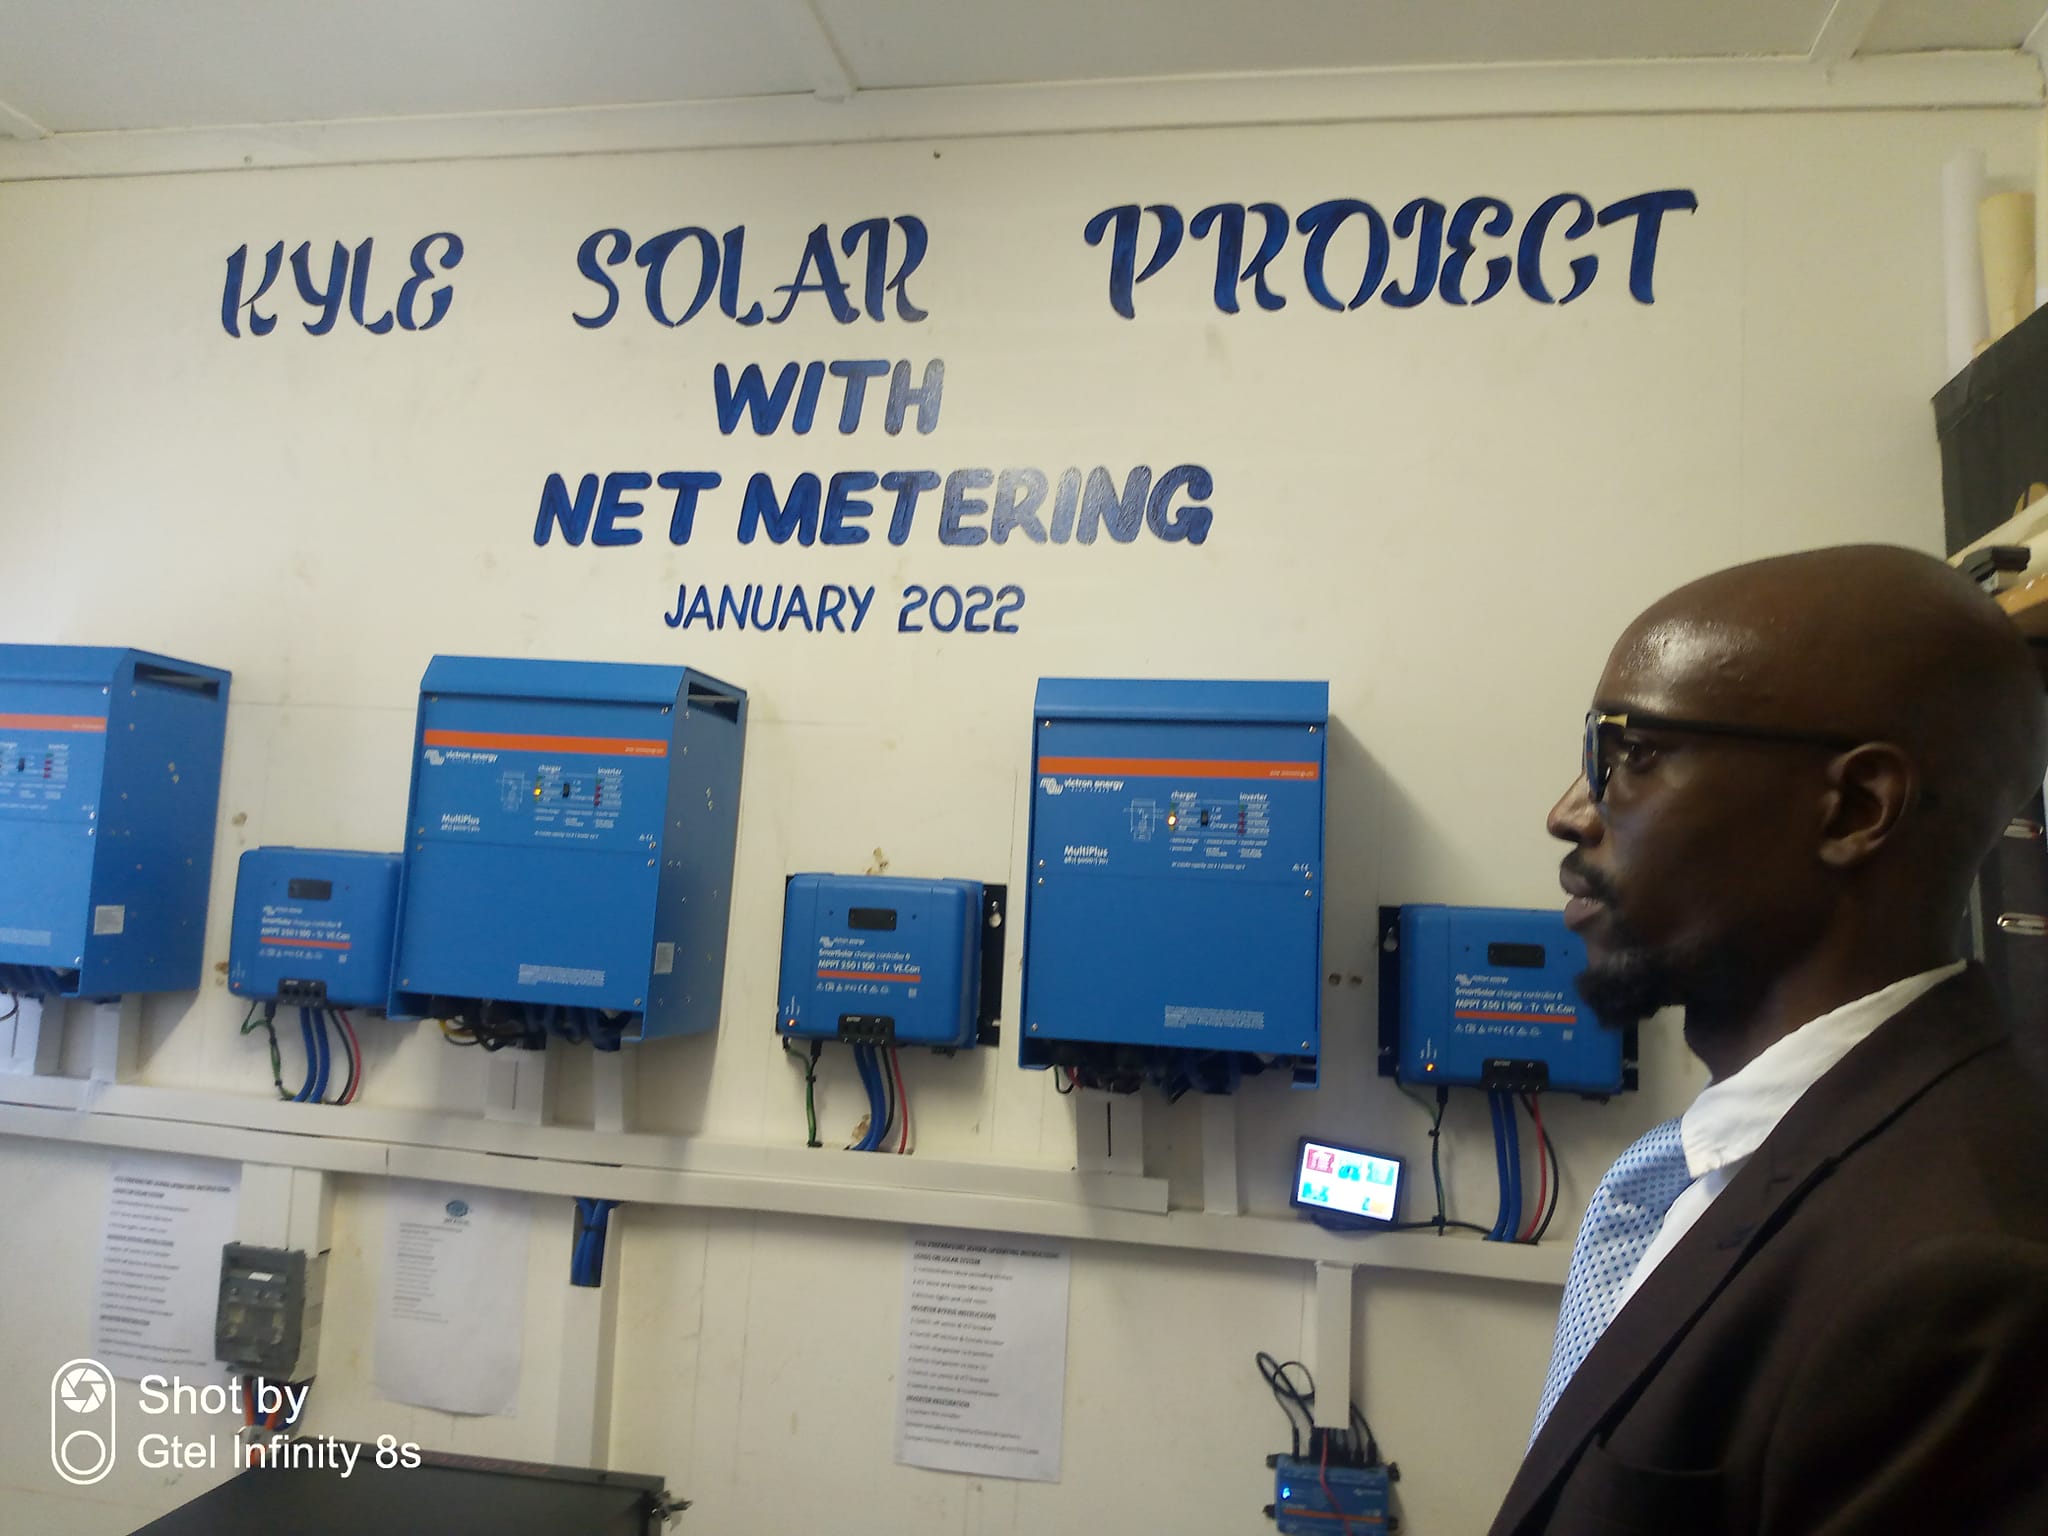 Kyle Prep’s solar project sets pace for energy conservation